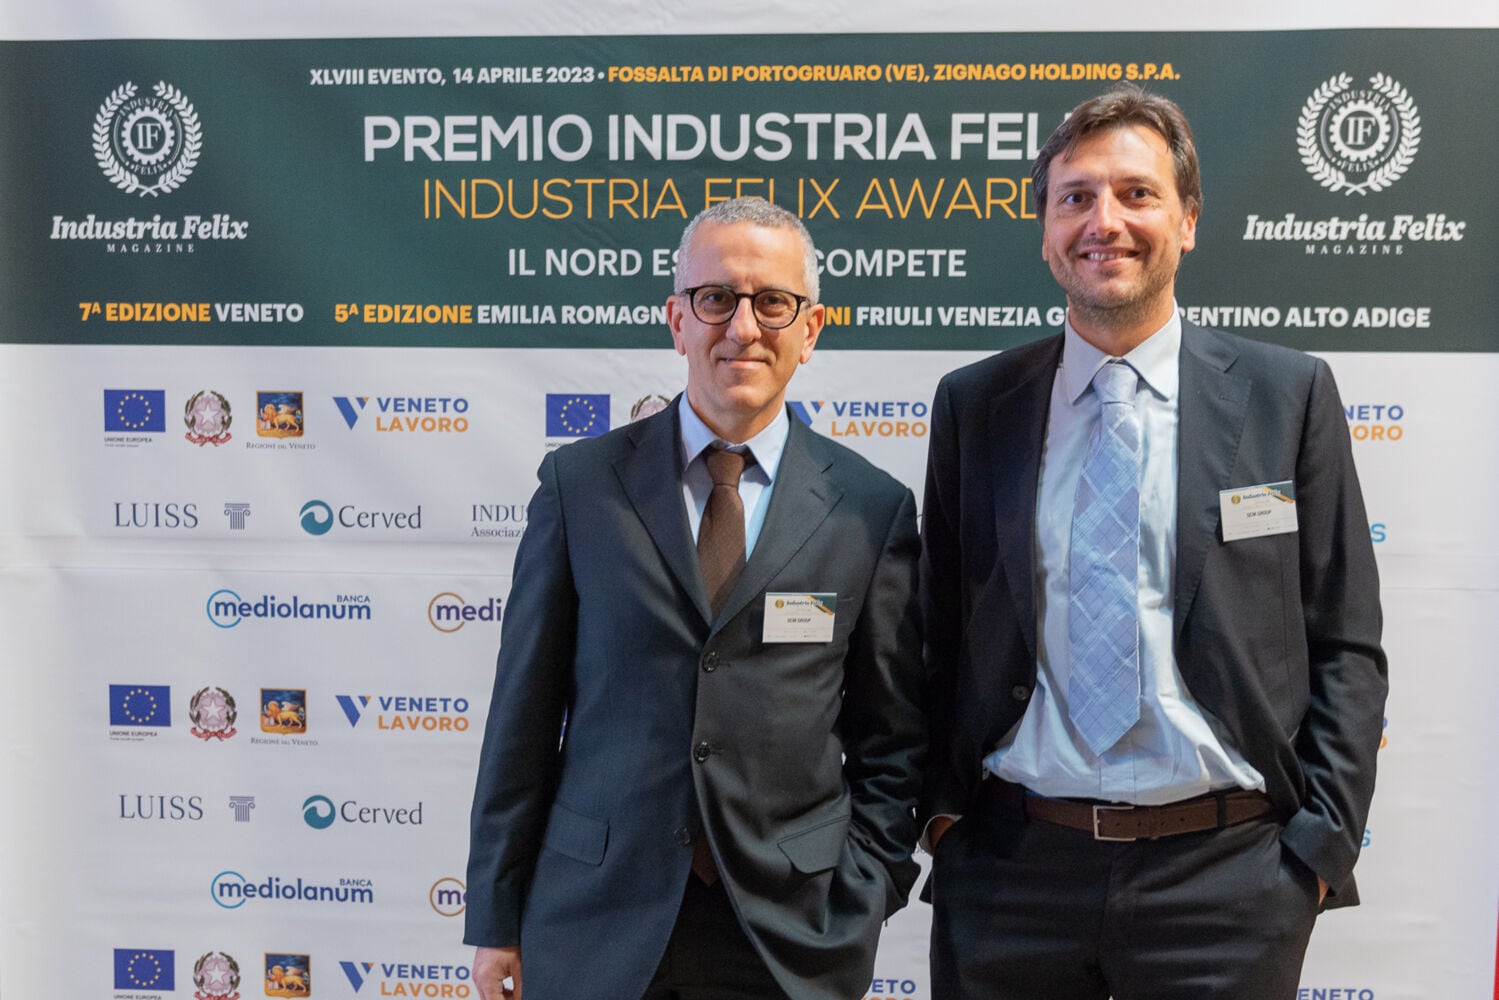 Scm Group among the best Italian companies for financial reliability